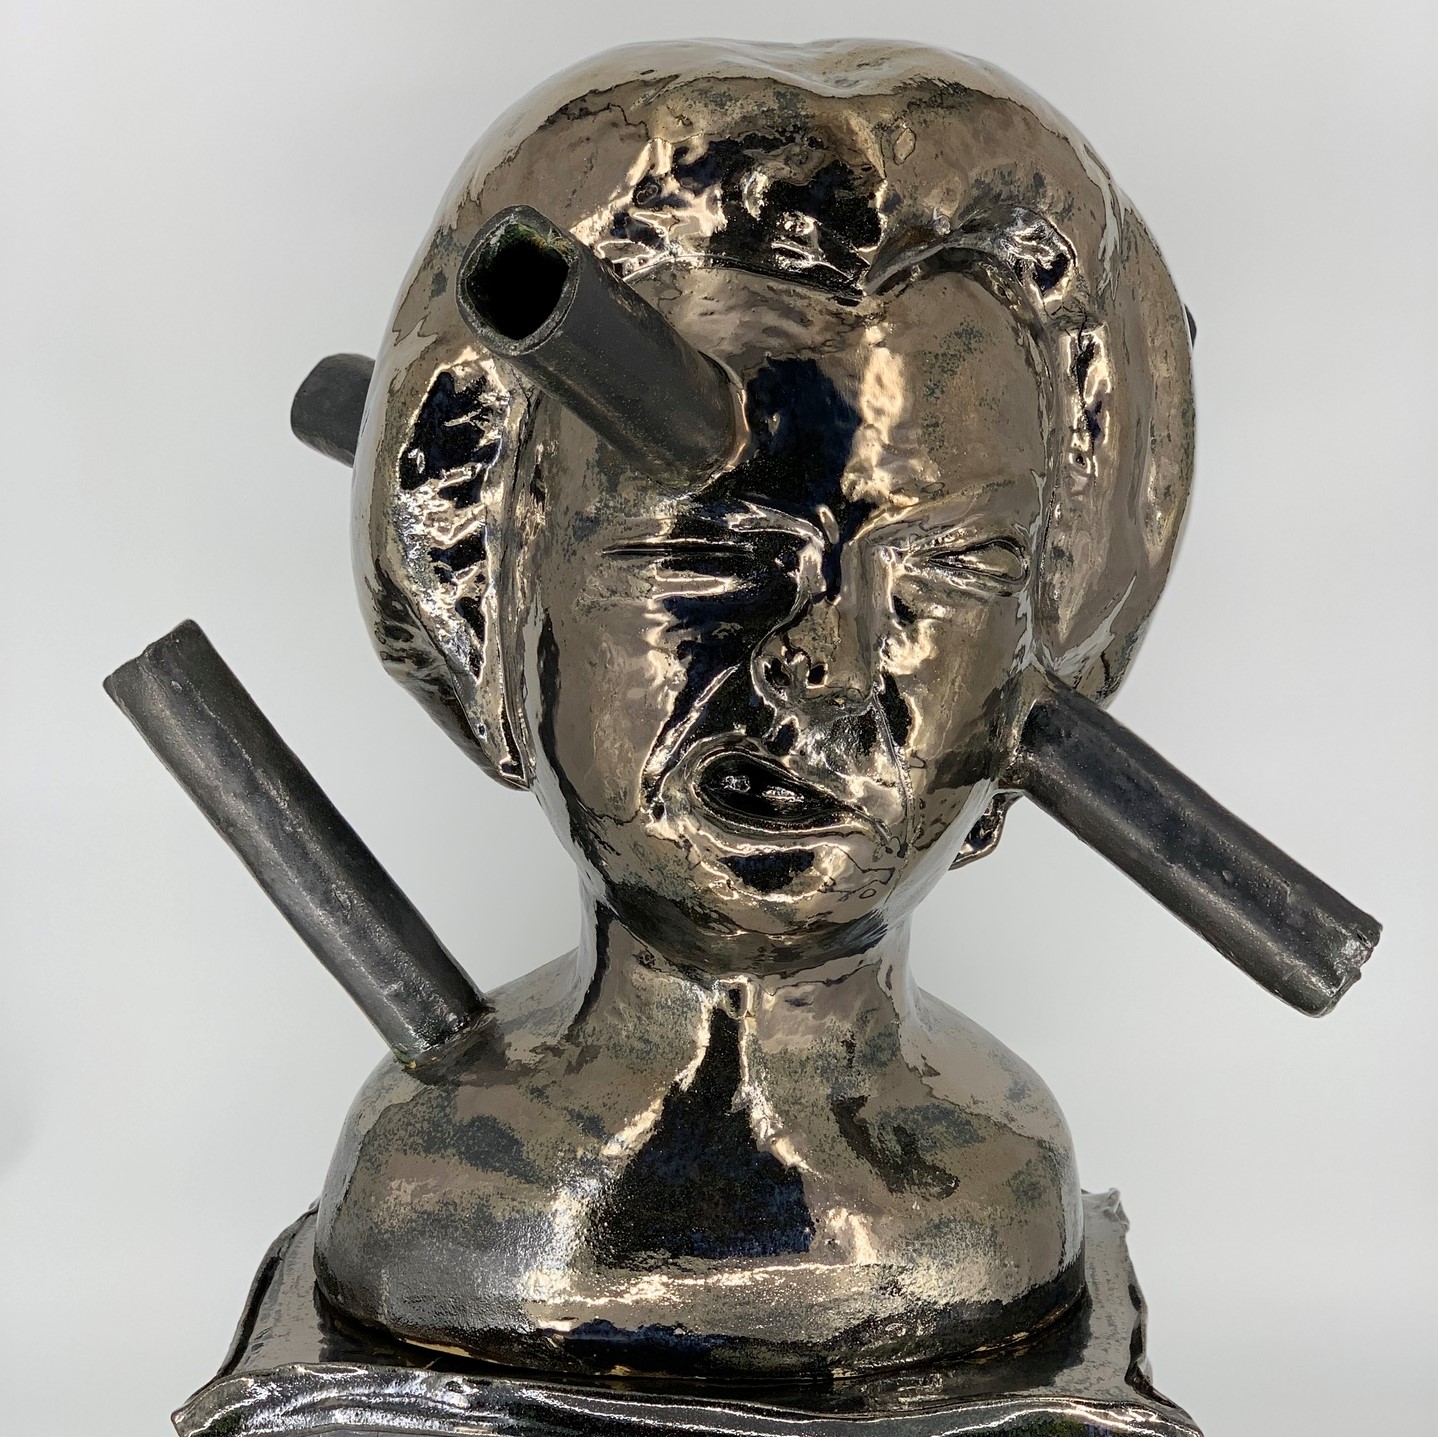 a bust of a young person with bars going through the face, head, and shoulder with a pained expression and the caption of the bust says, "Year of 2020".